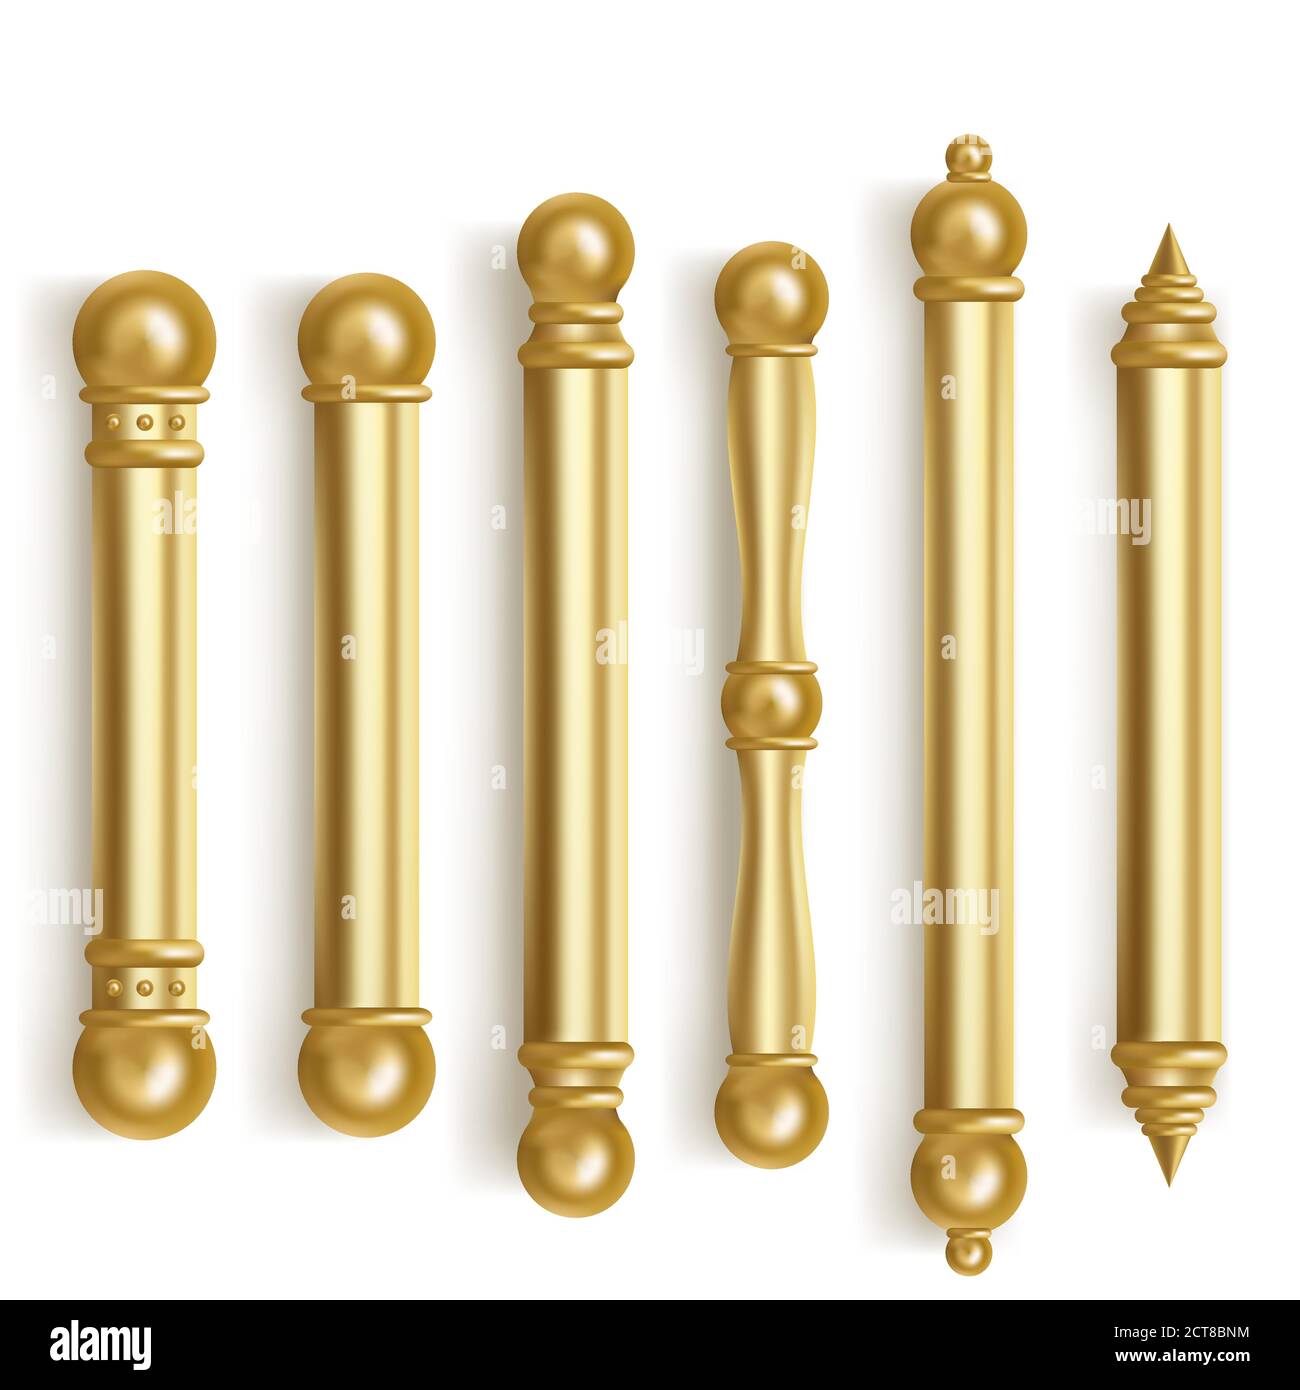 Baroque gold door handles for room interior in office or home. Vector realistic set of vintage golden long door pull knobs. Bar shape handles with balls isolated on white background Stock Vector